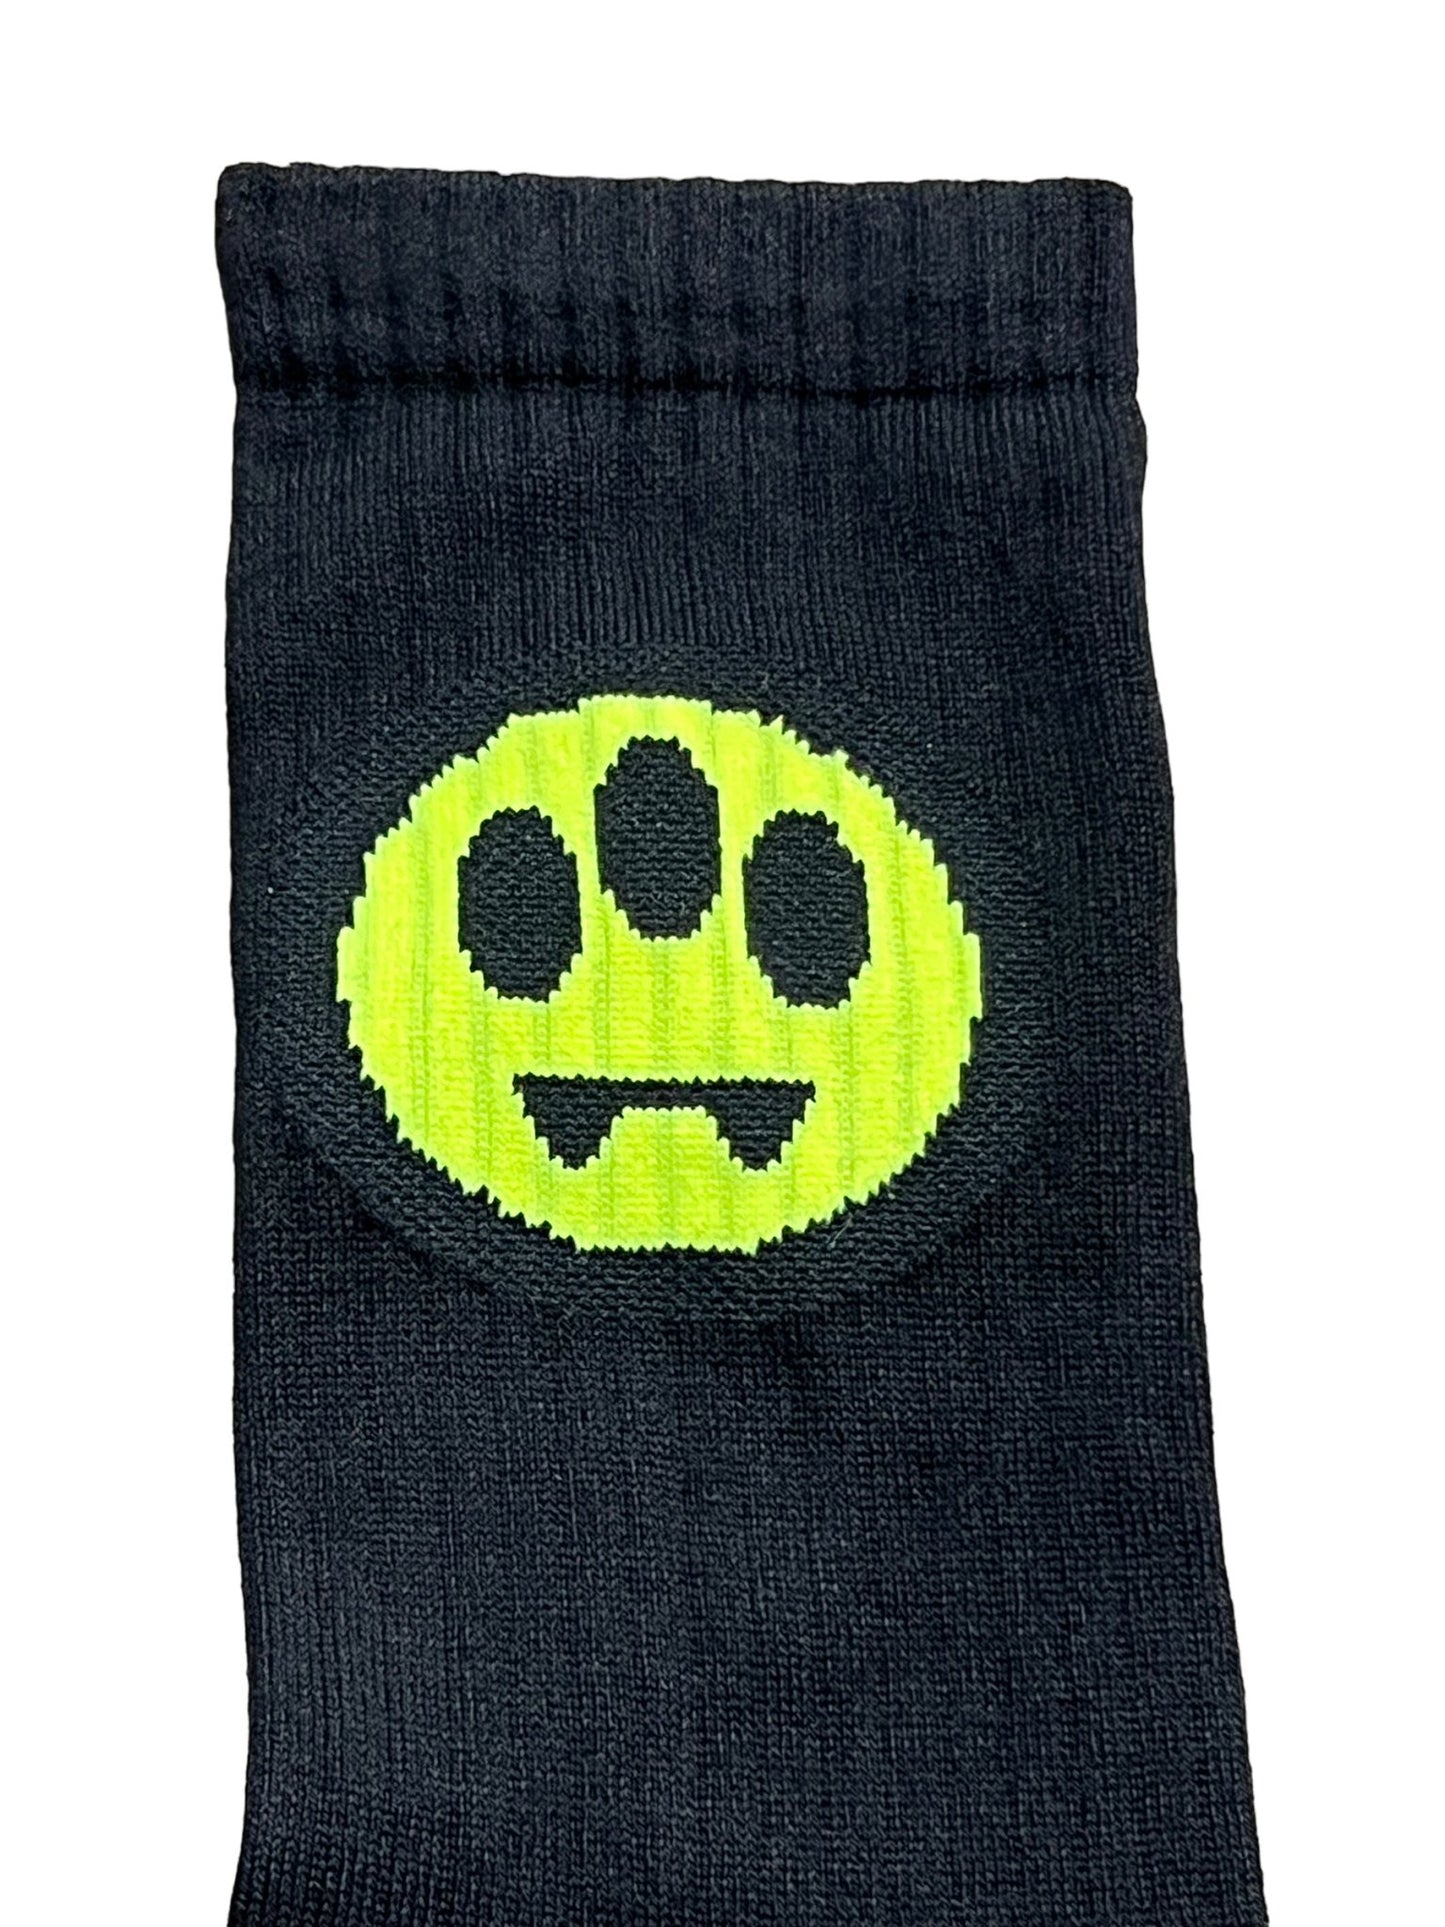 BARROW S4BWUASO140 socks unisex featuring a black design with a neon green paw print on the ankle area, made in Italy.